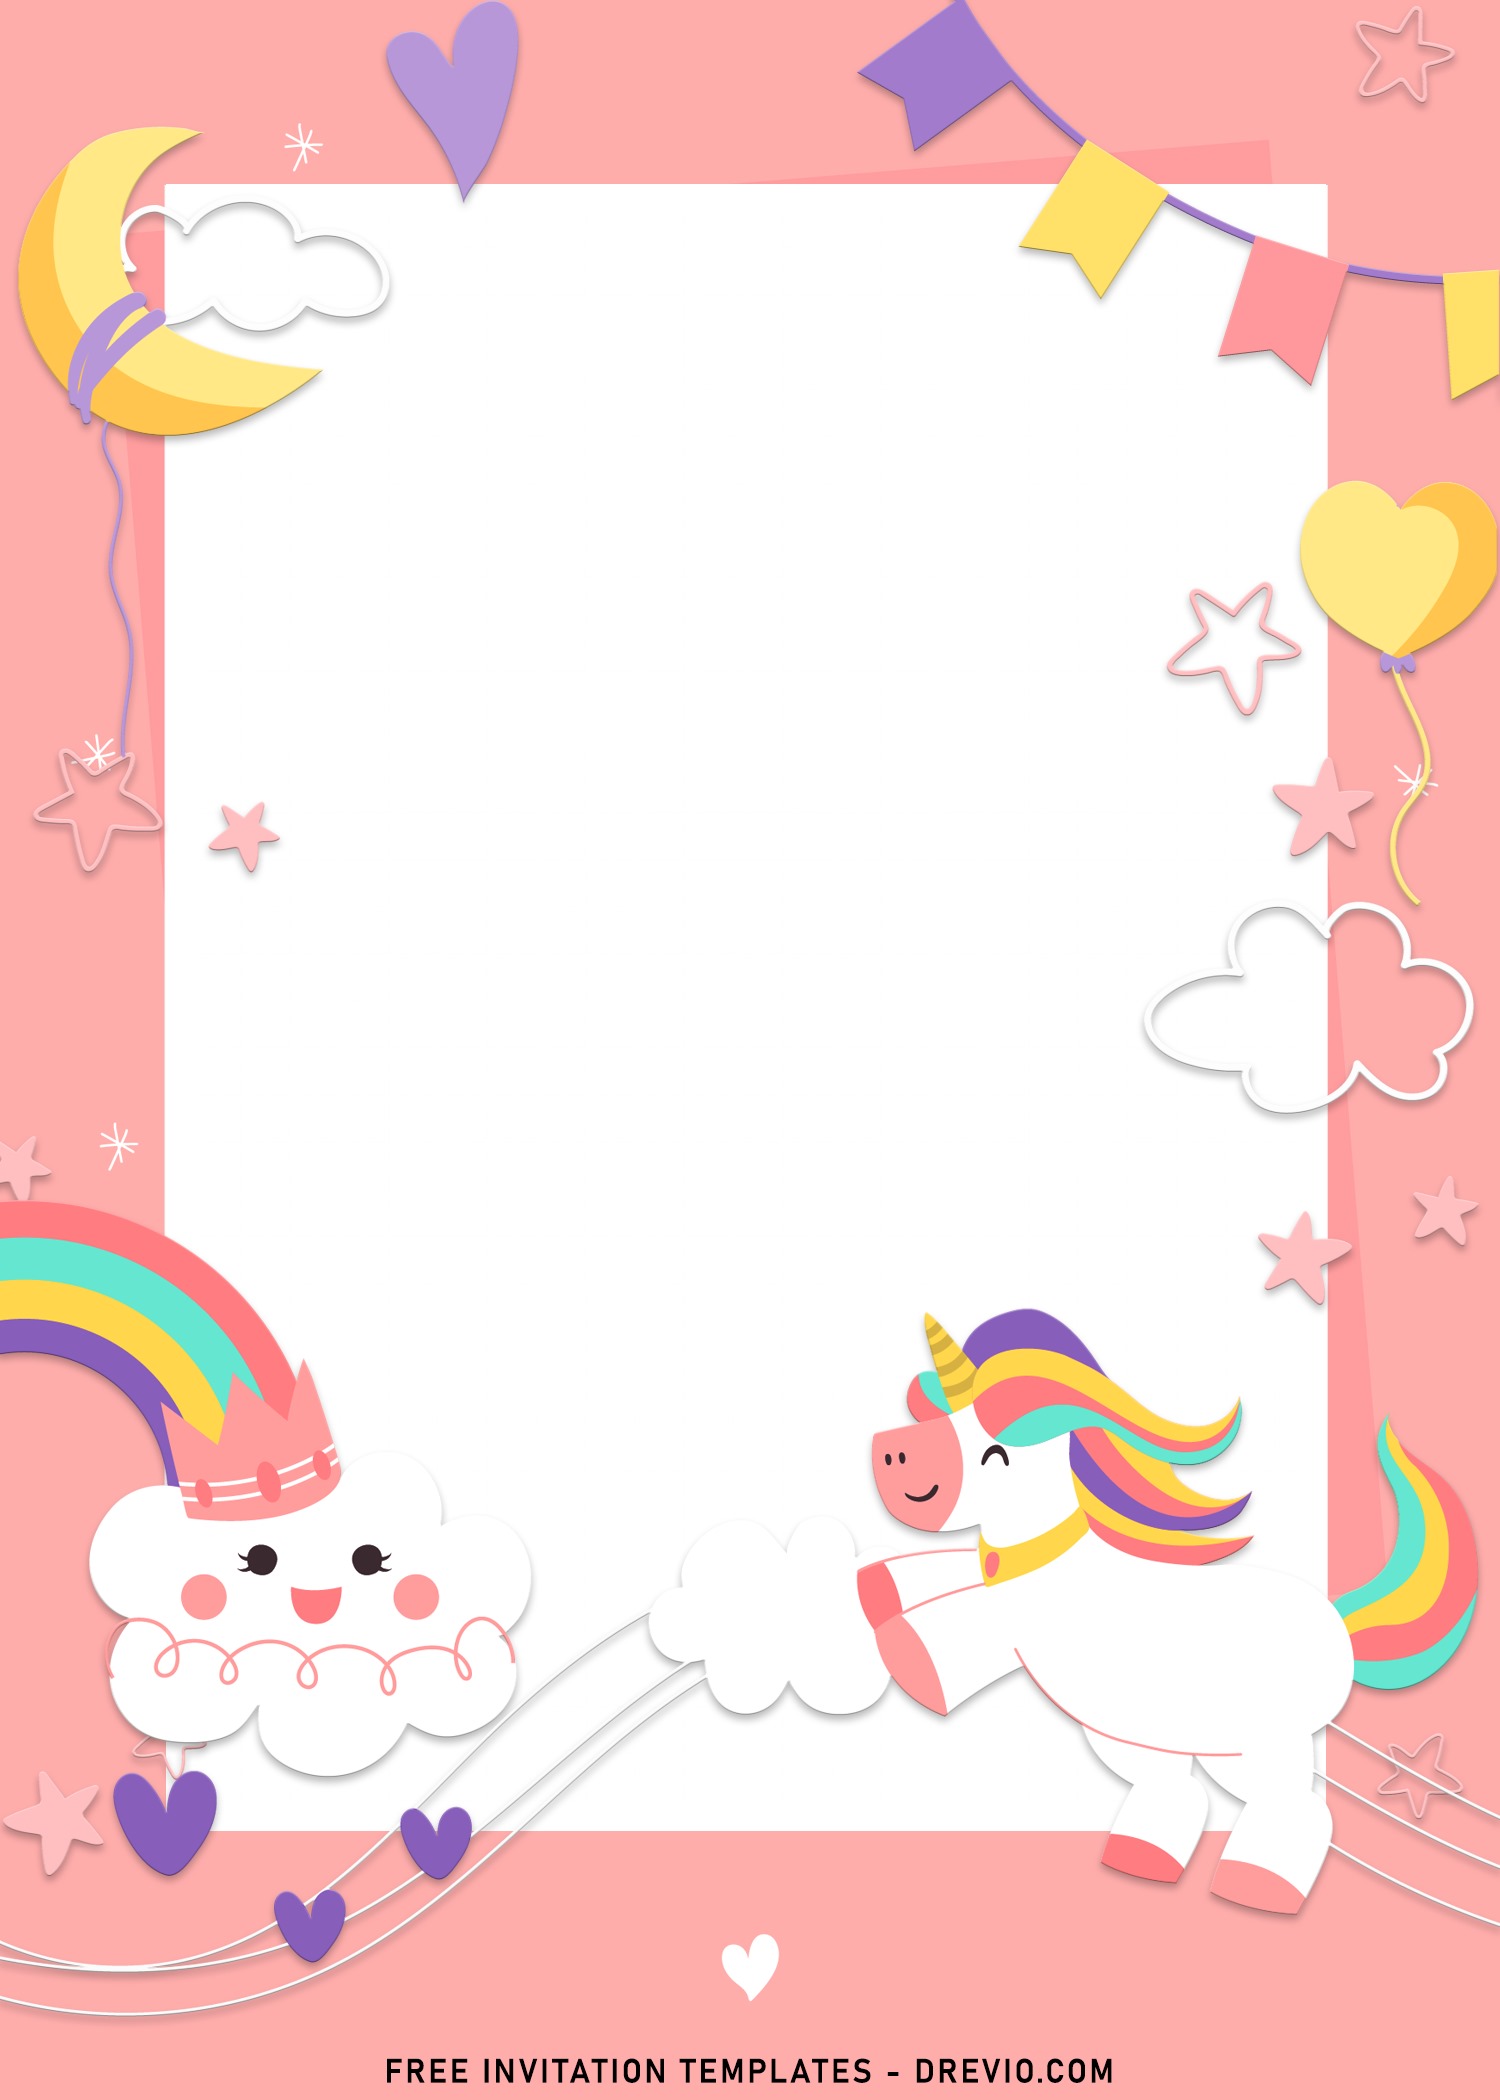 8+ unicorn girl birthday invitation templates for your daughter's